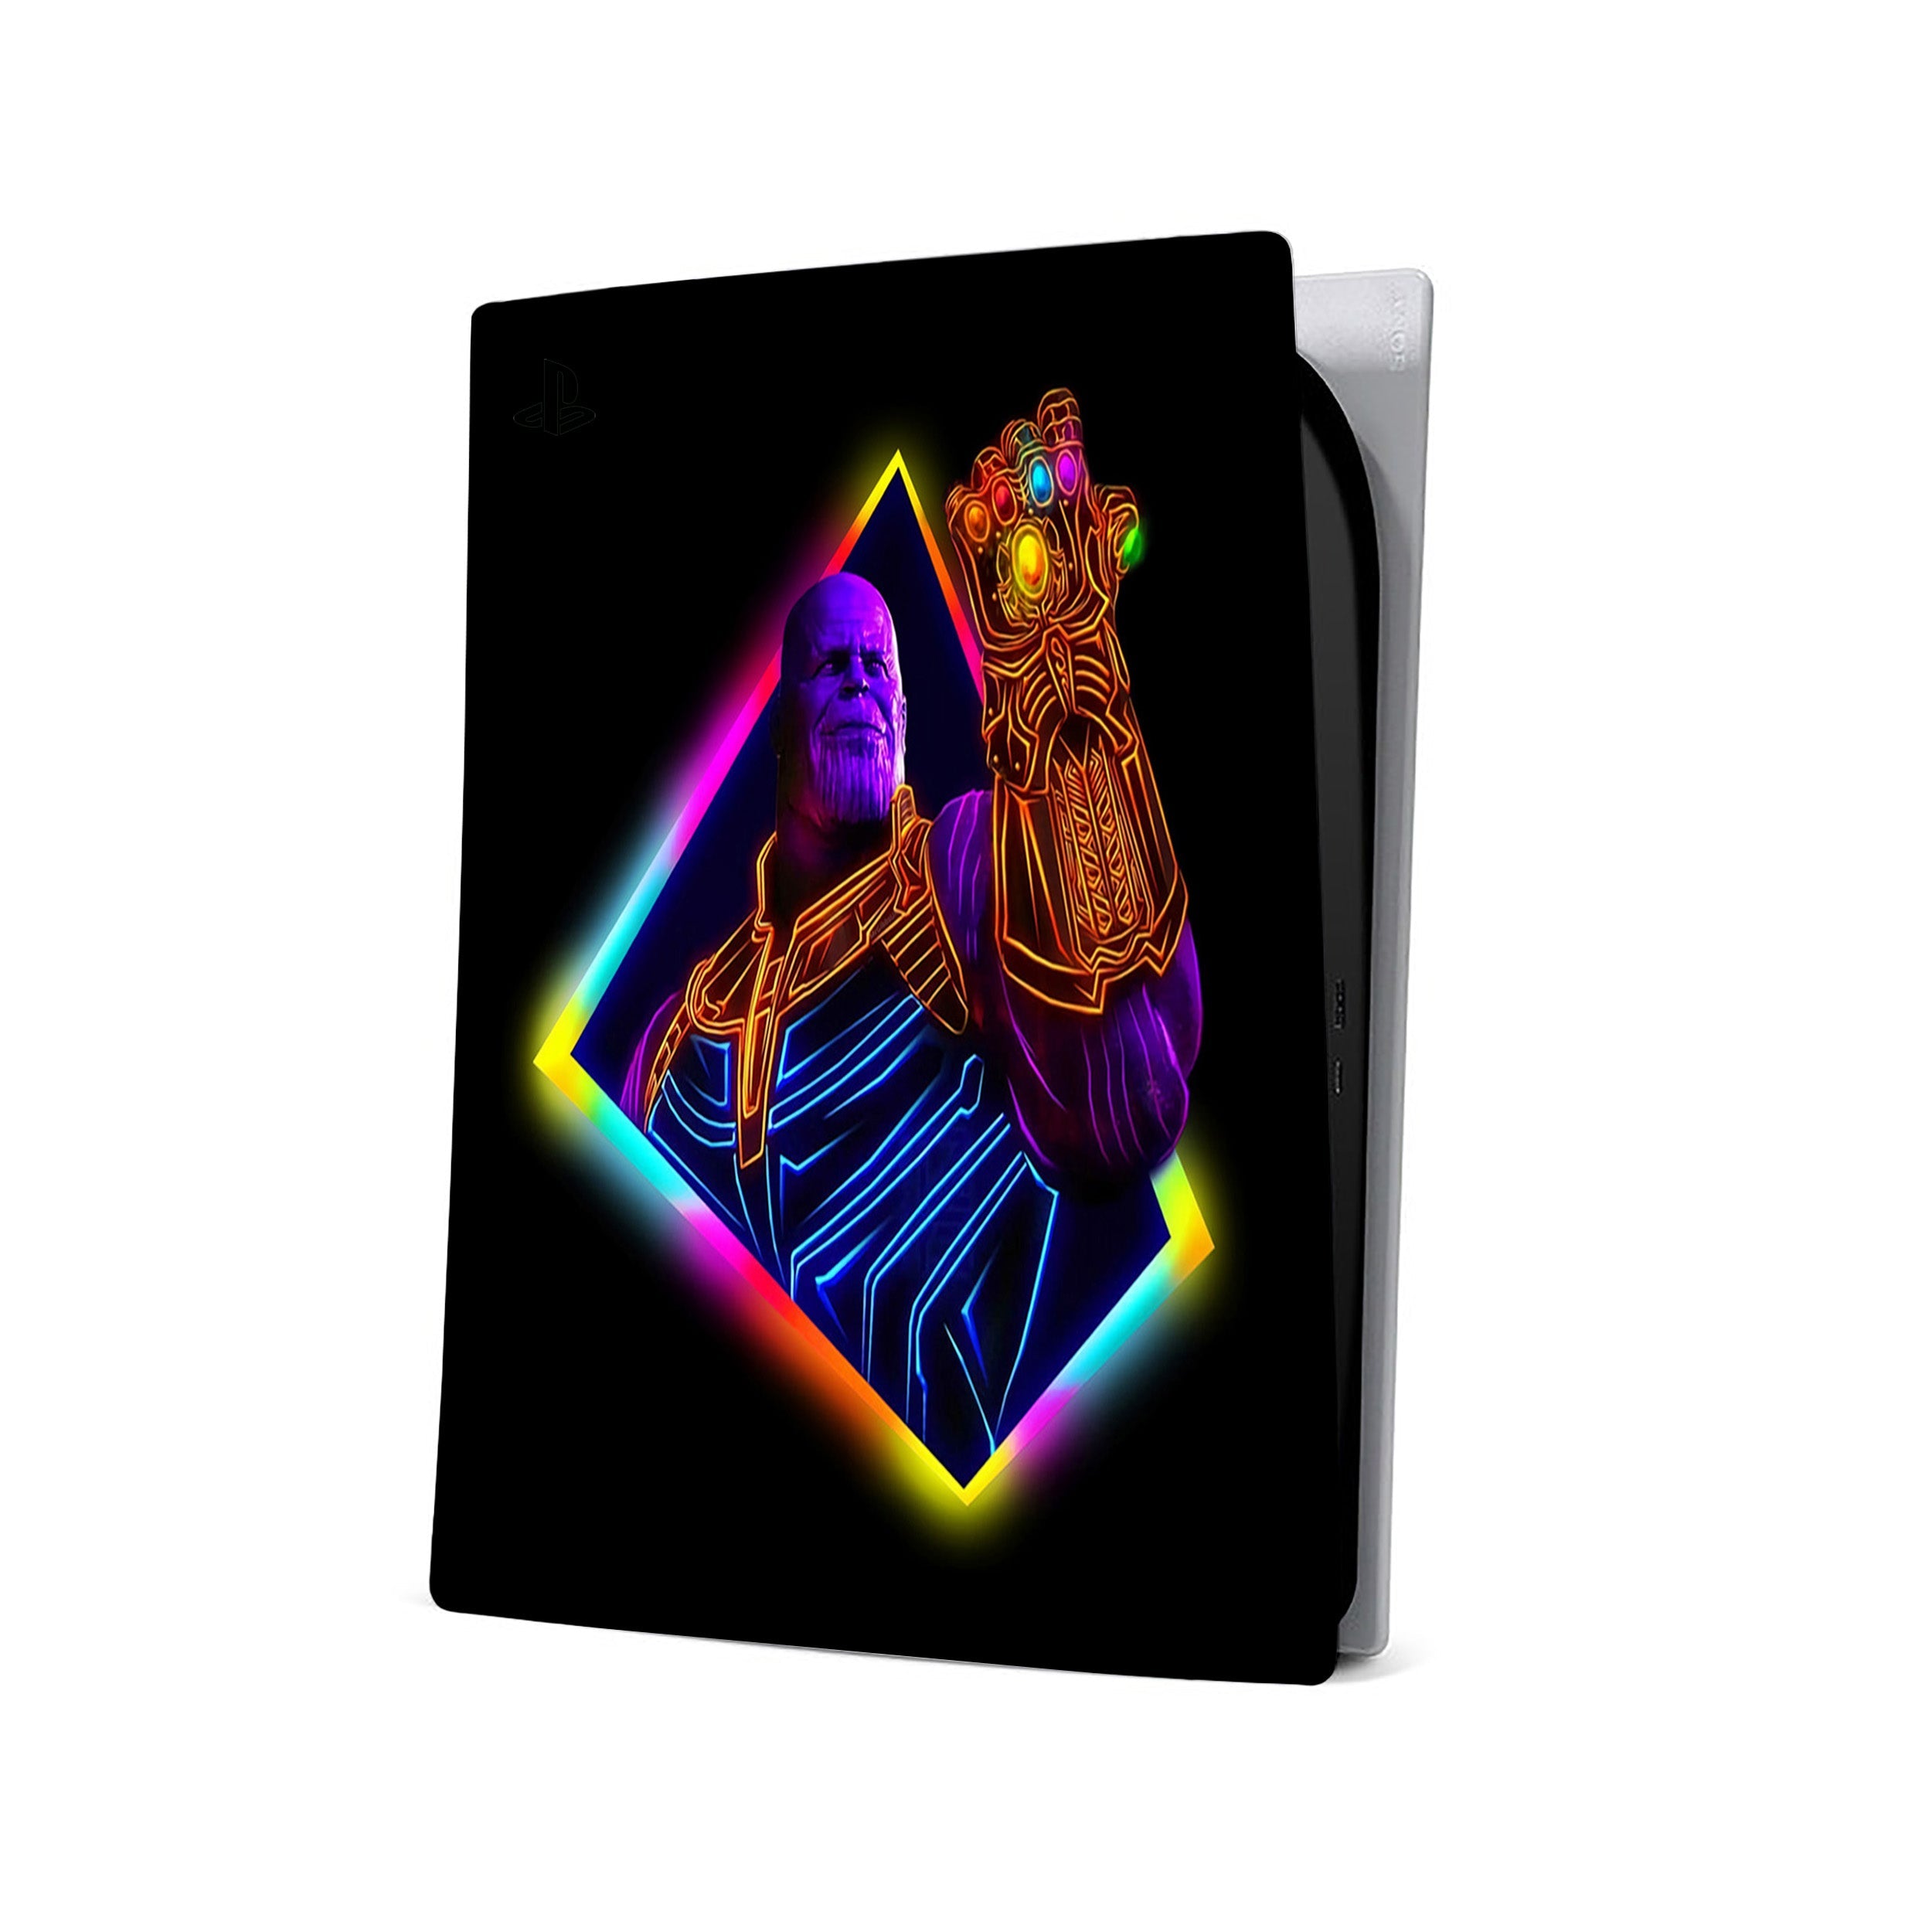 A video game skin featuring a Marvel Thanos design for the PS5.